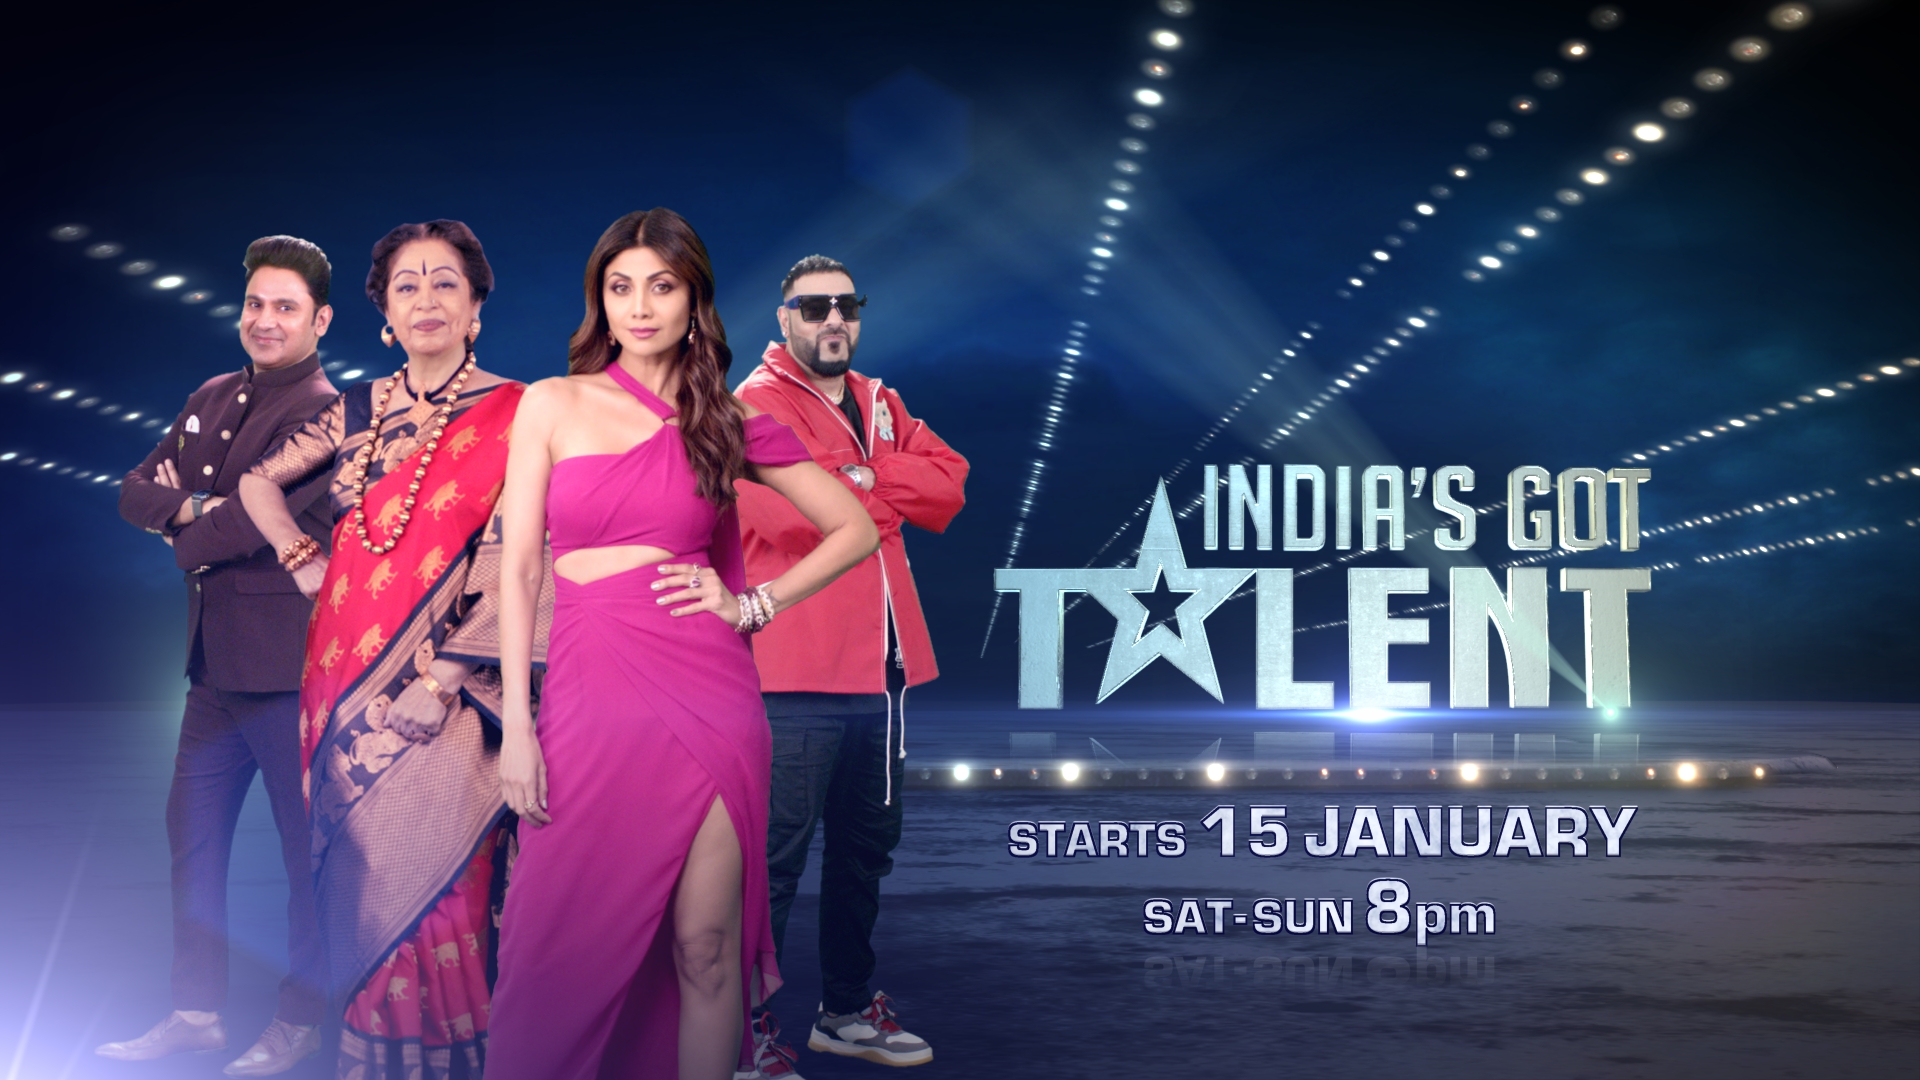 India’s Got Talent premieres on Sony Entertainment Television on 15th January